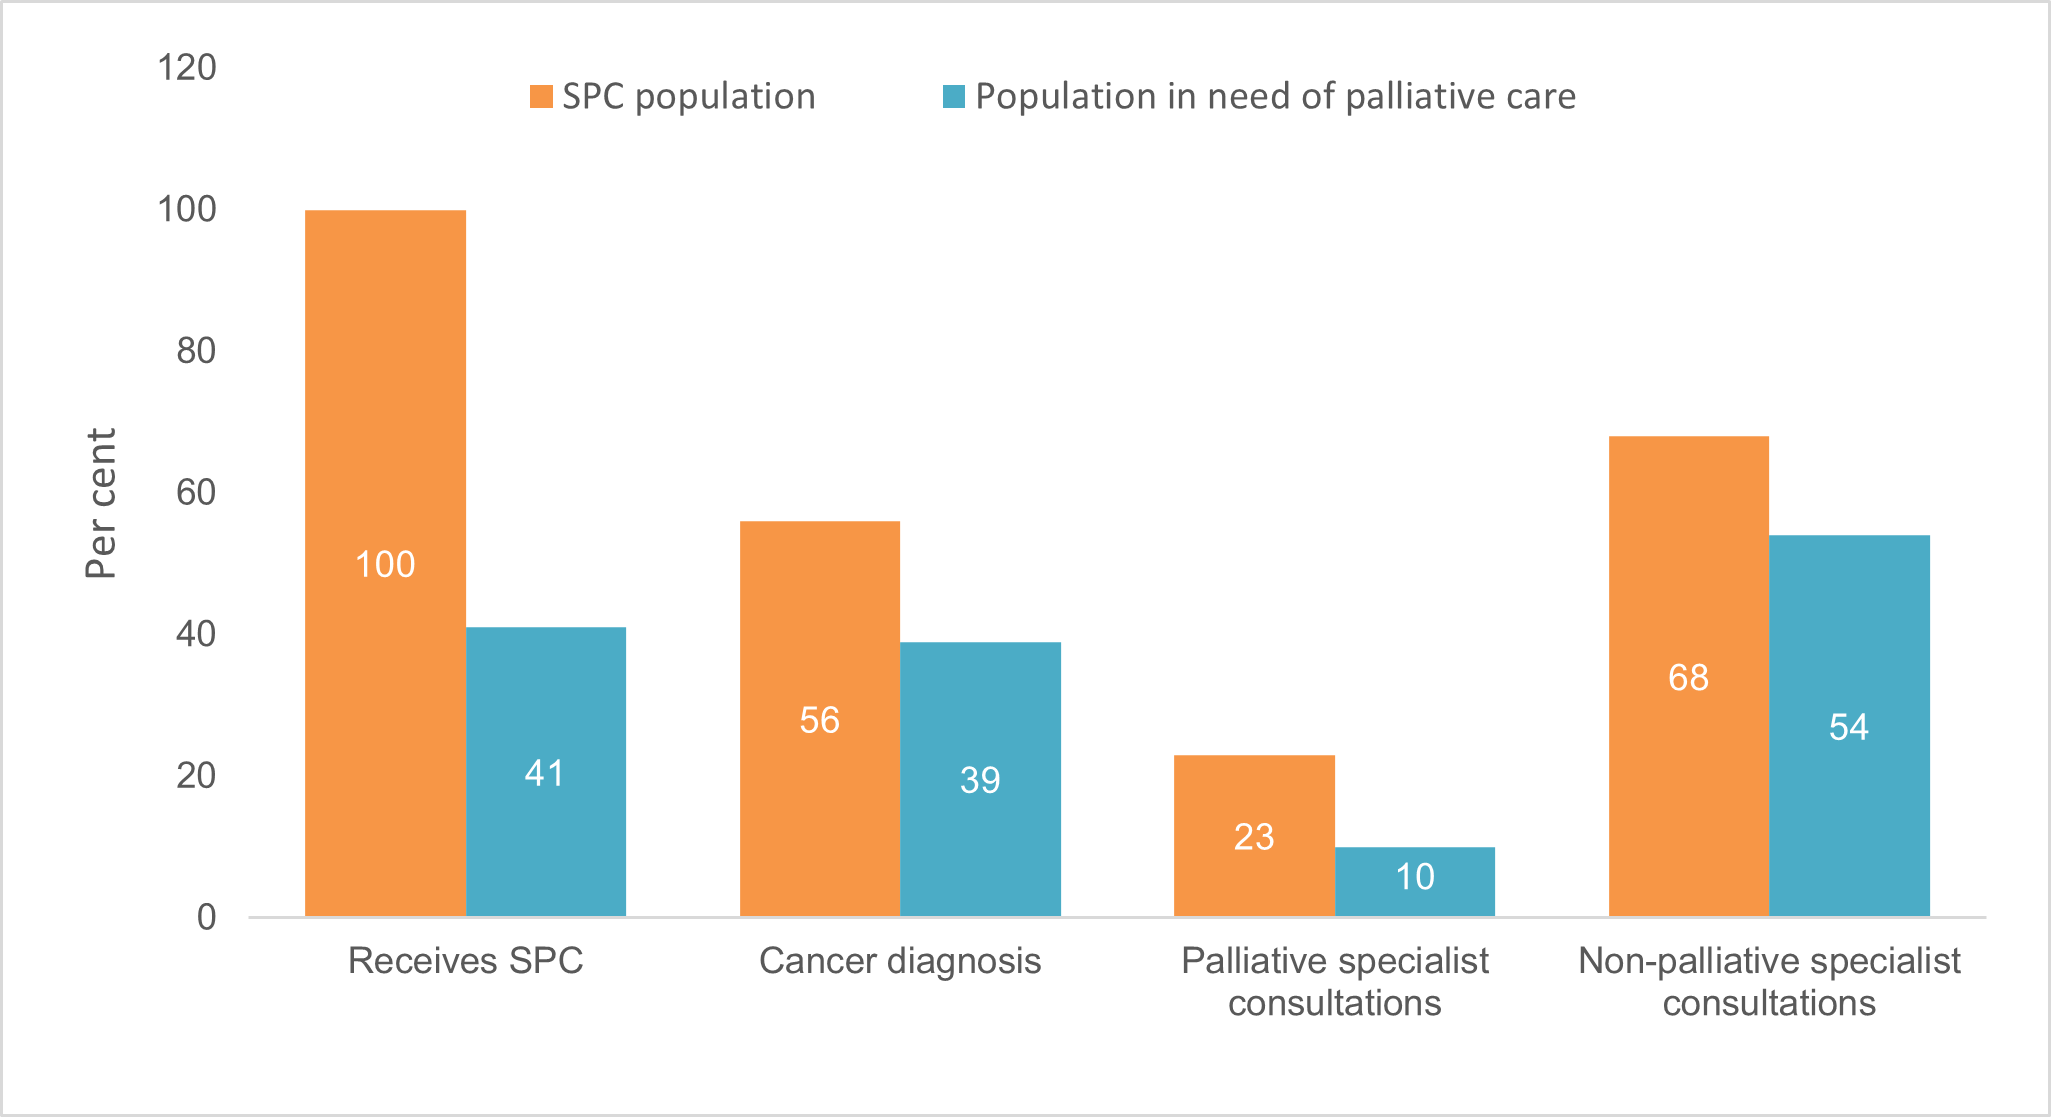 This figure compares the proportions of the SPC population with the population in need of palliative care in regards to SPC services, cancer diagnosis and specialist consultations. Broadly the proportions are higher for the SPC population across the board.